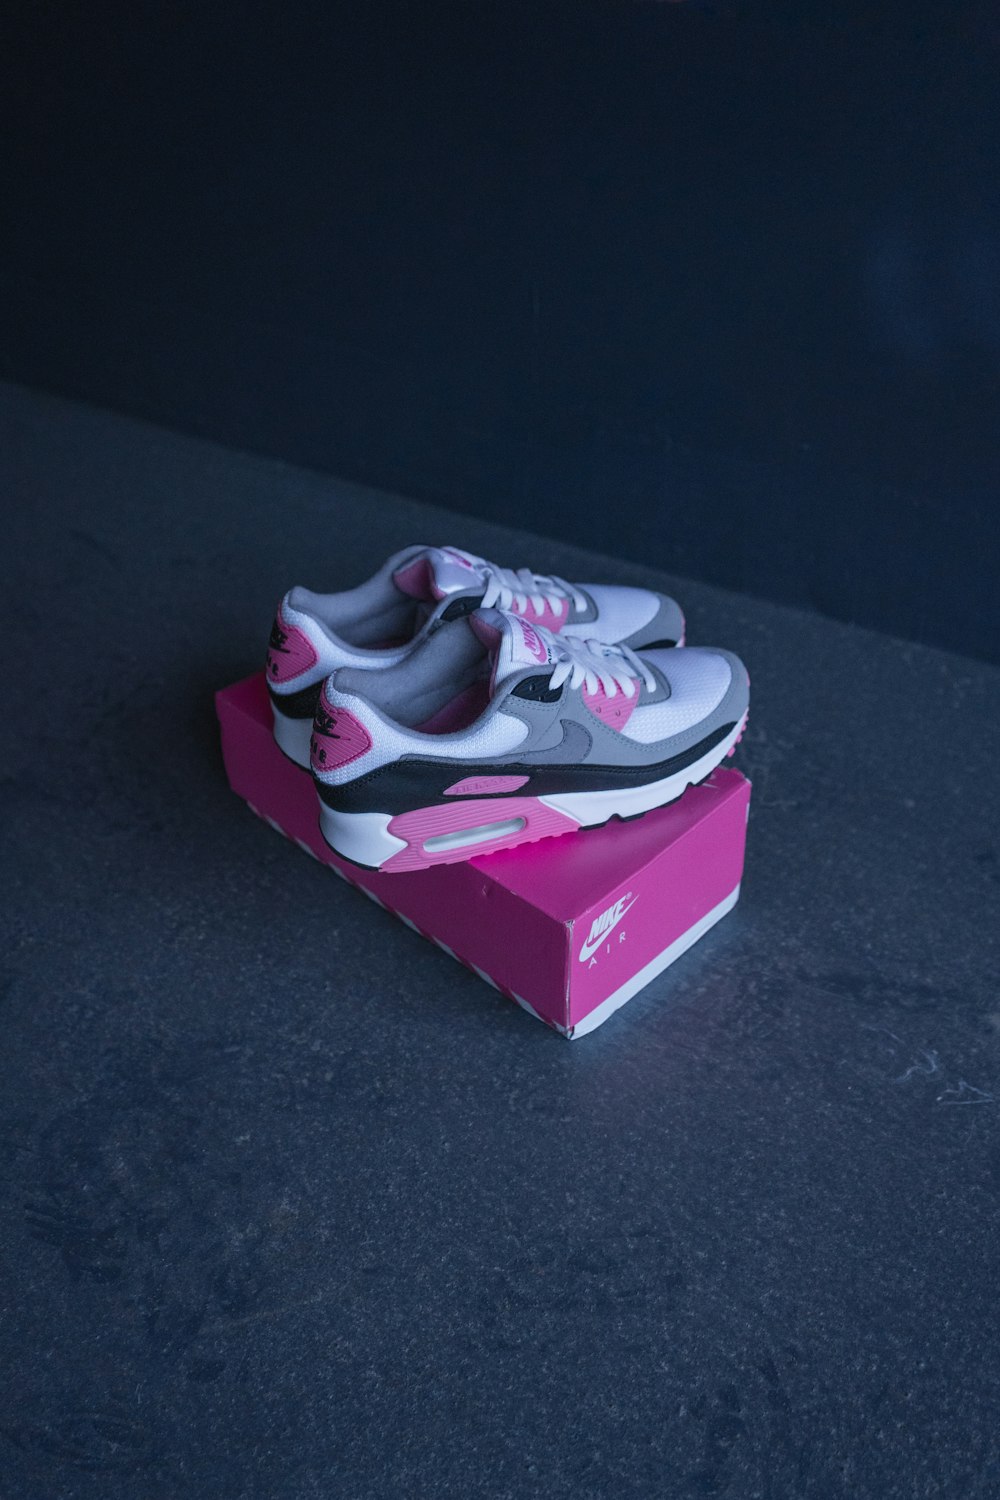 pink and white nike air max 90 shoe with box